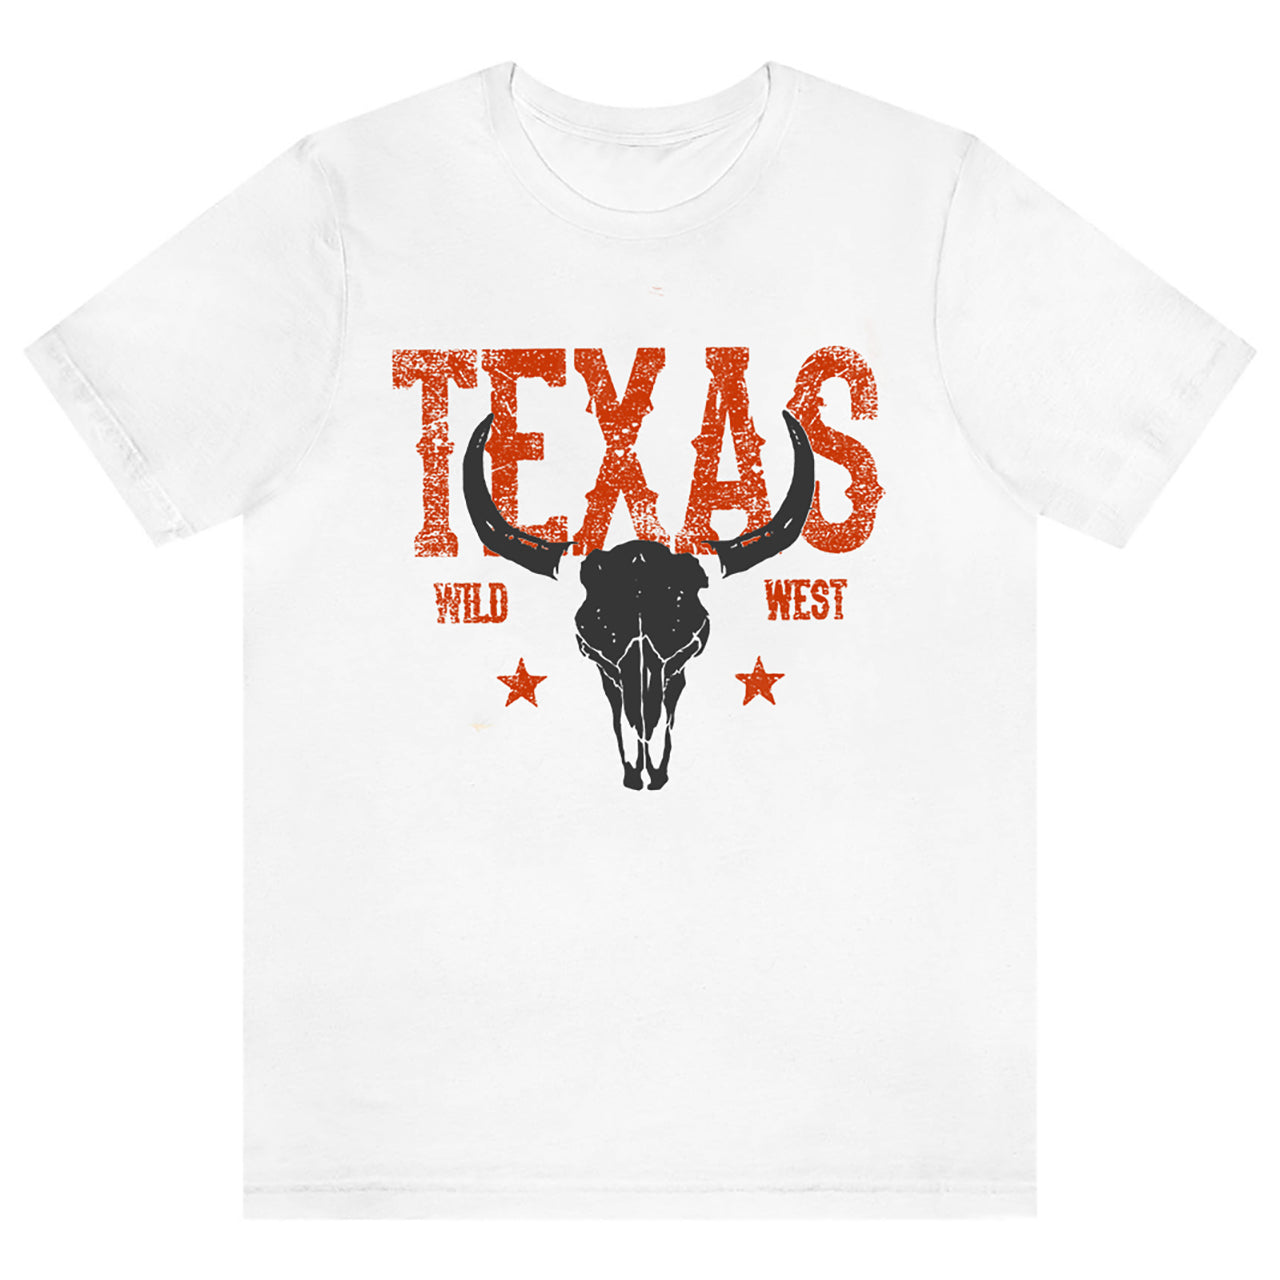 Texas Vintage Inspired Cotton T-shirt